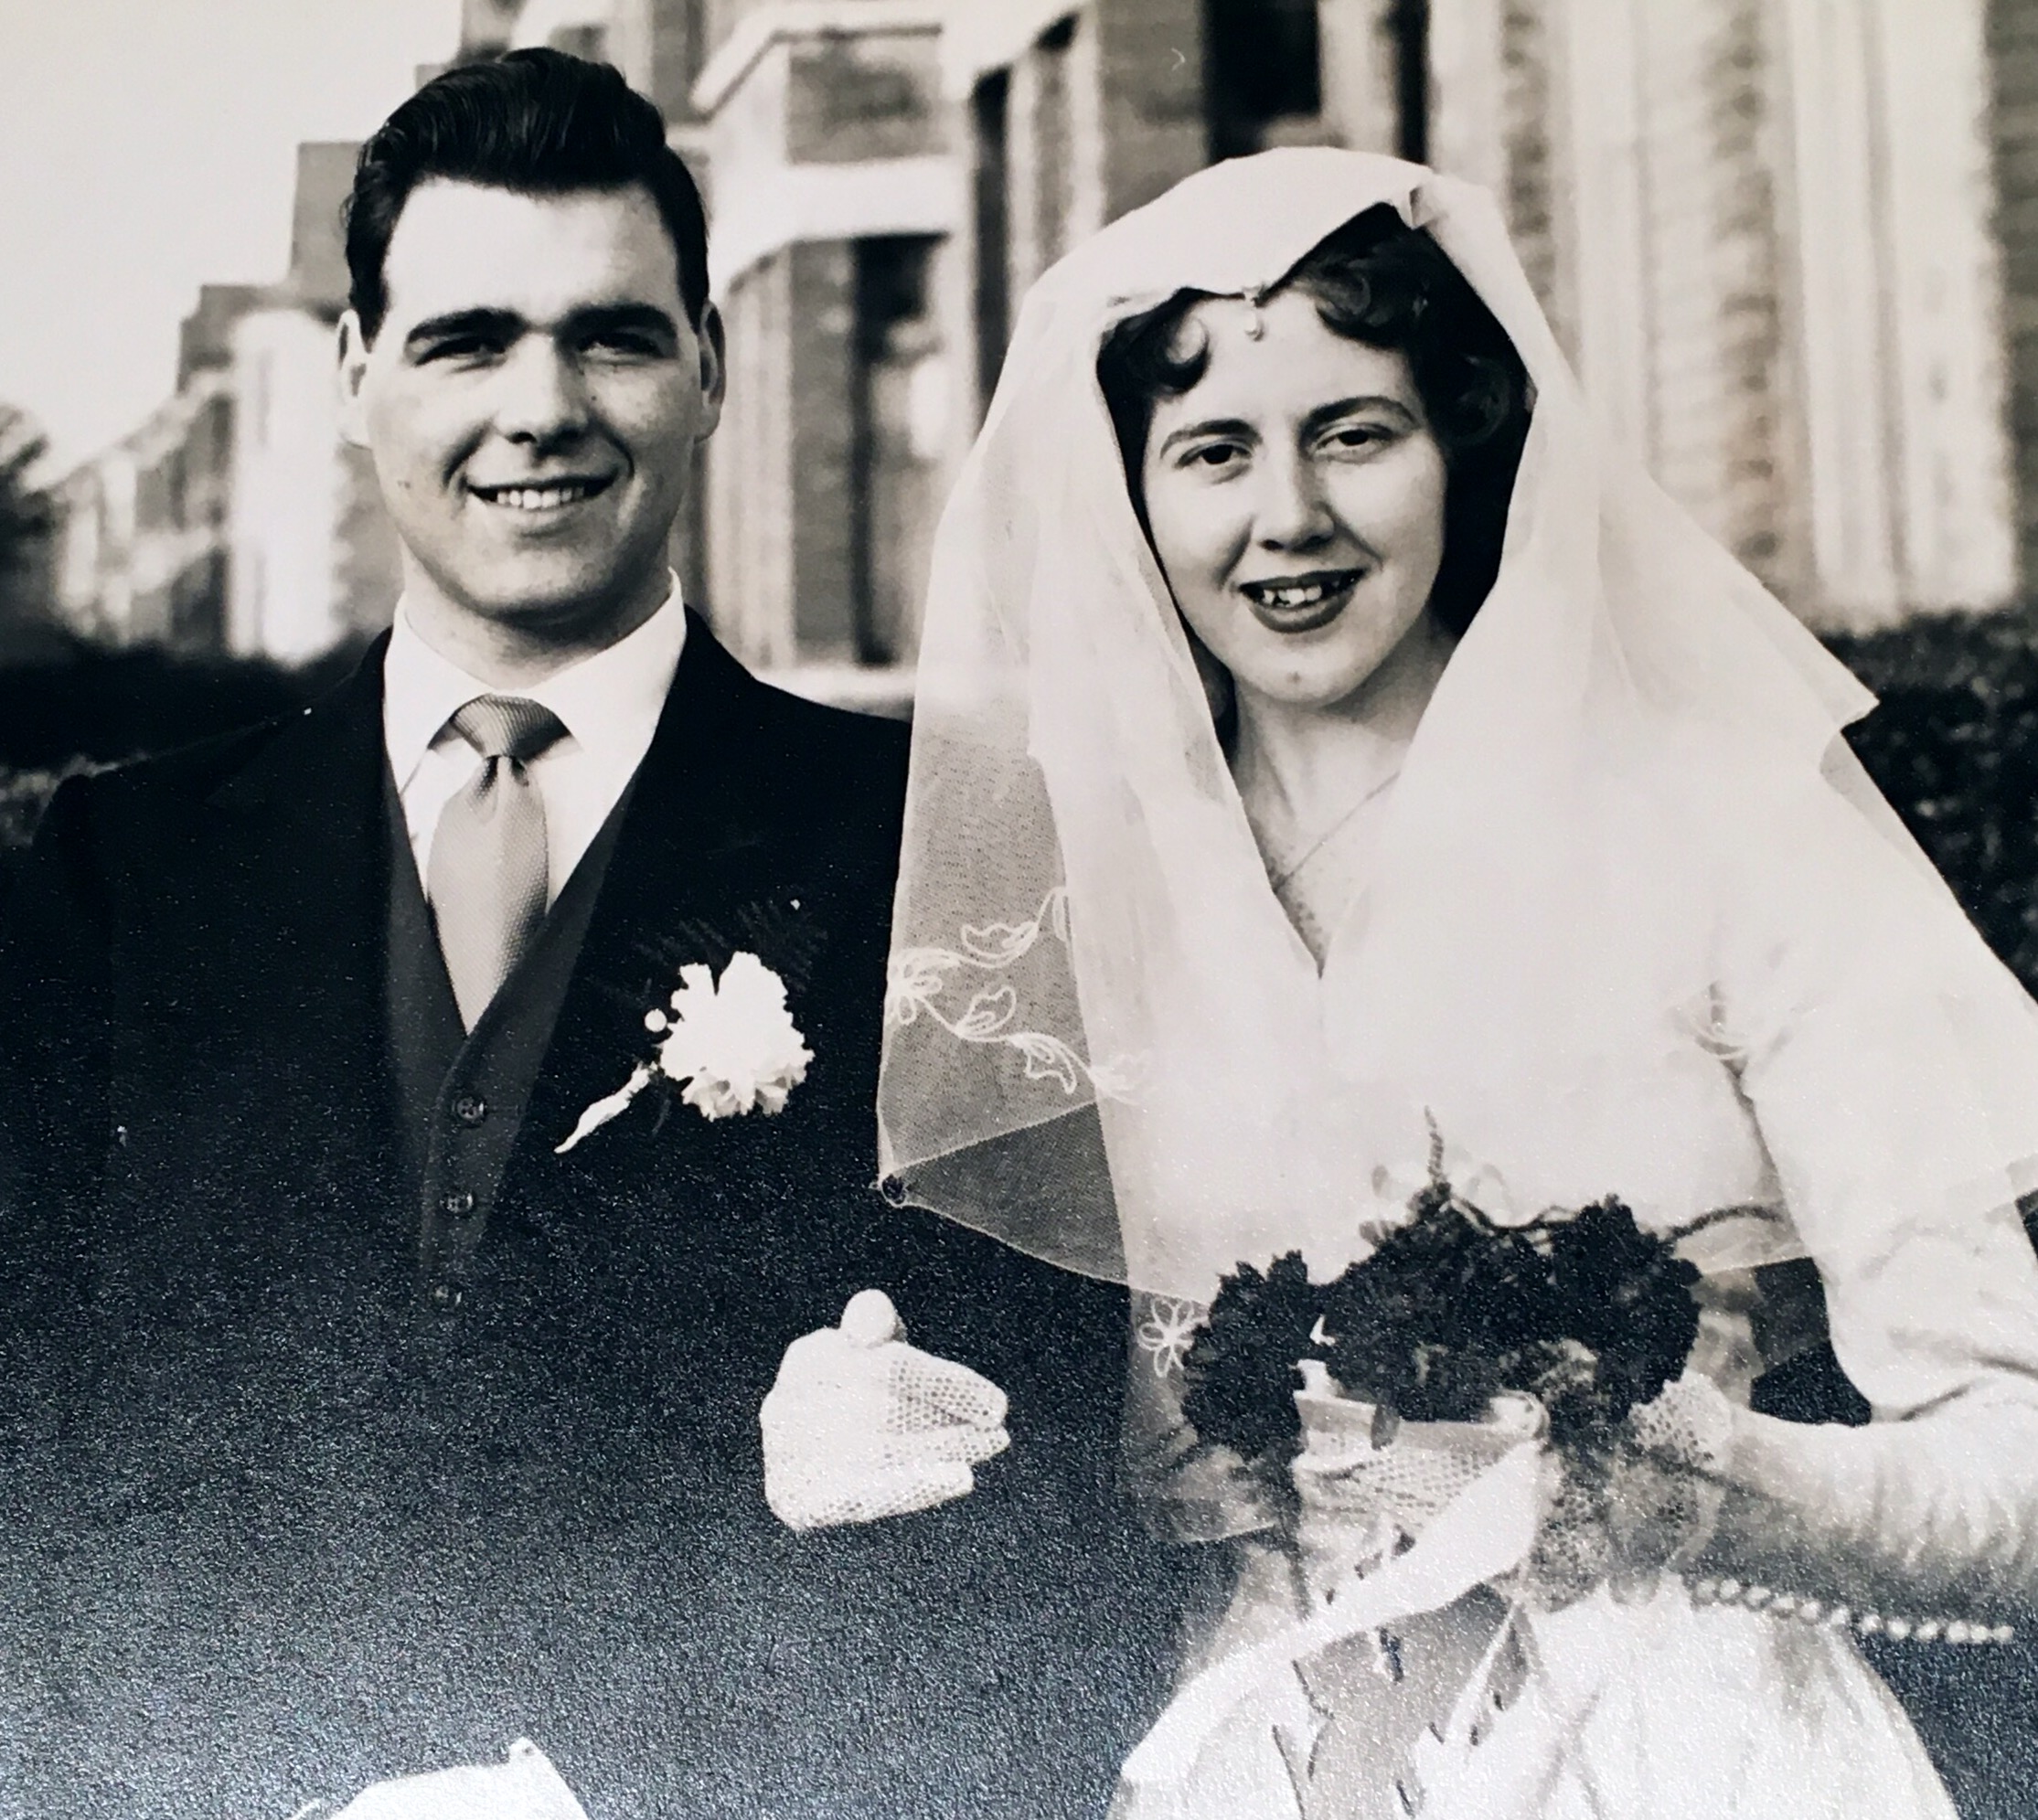 Owen Roche and Joan Delahunt on their wedding day in 1957. Celebrating 60 years married next week